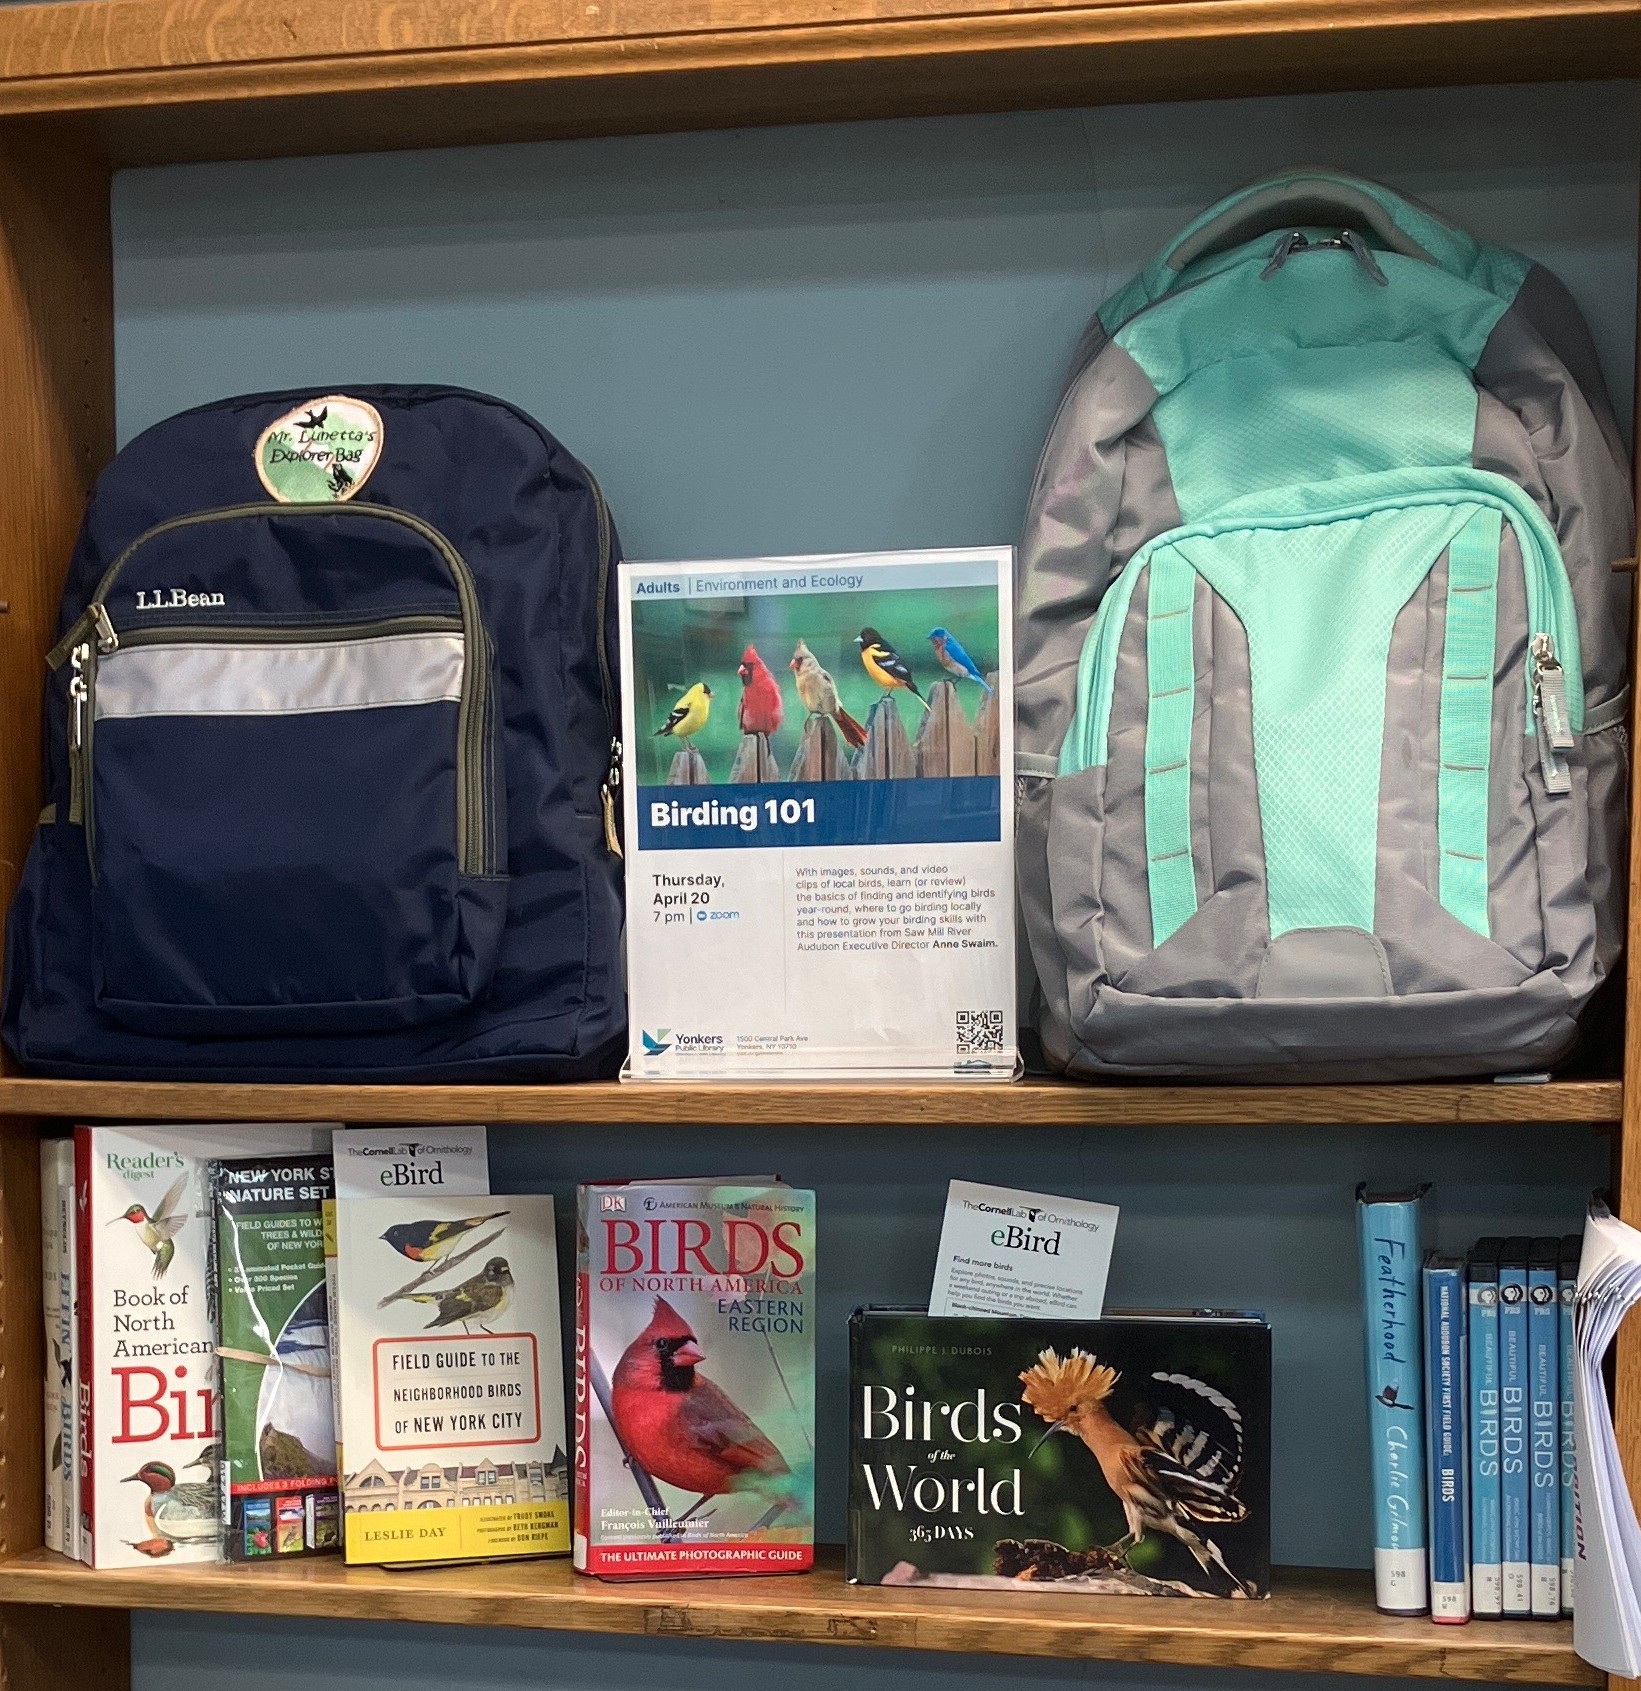 Mr. Lunetta explorer bags available for pick up at the library.